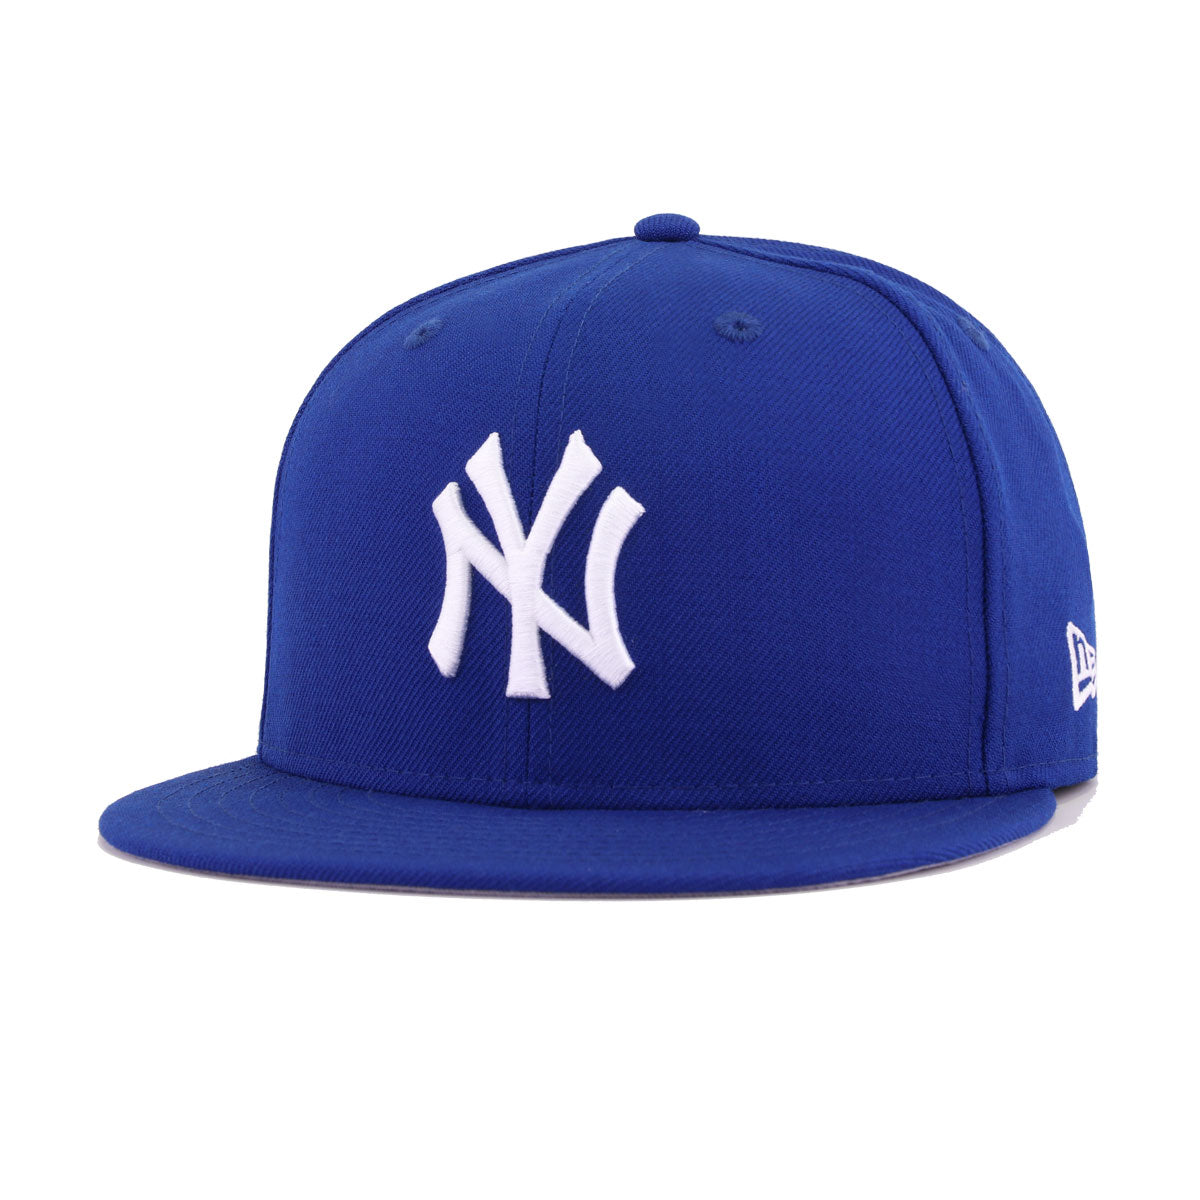 New York Yankees SKY BLUE DaBu Fitted Hat by New Era